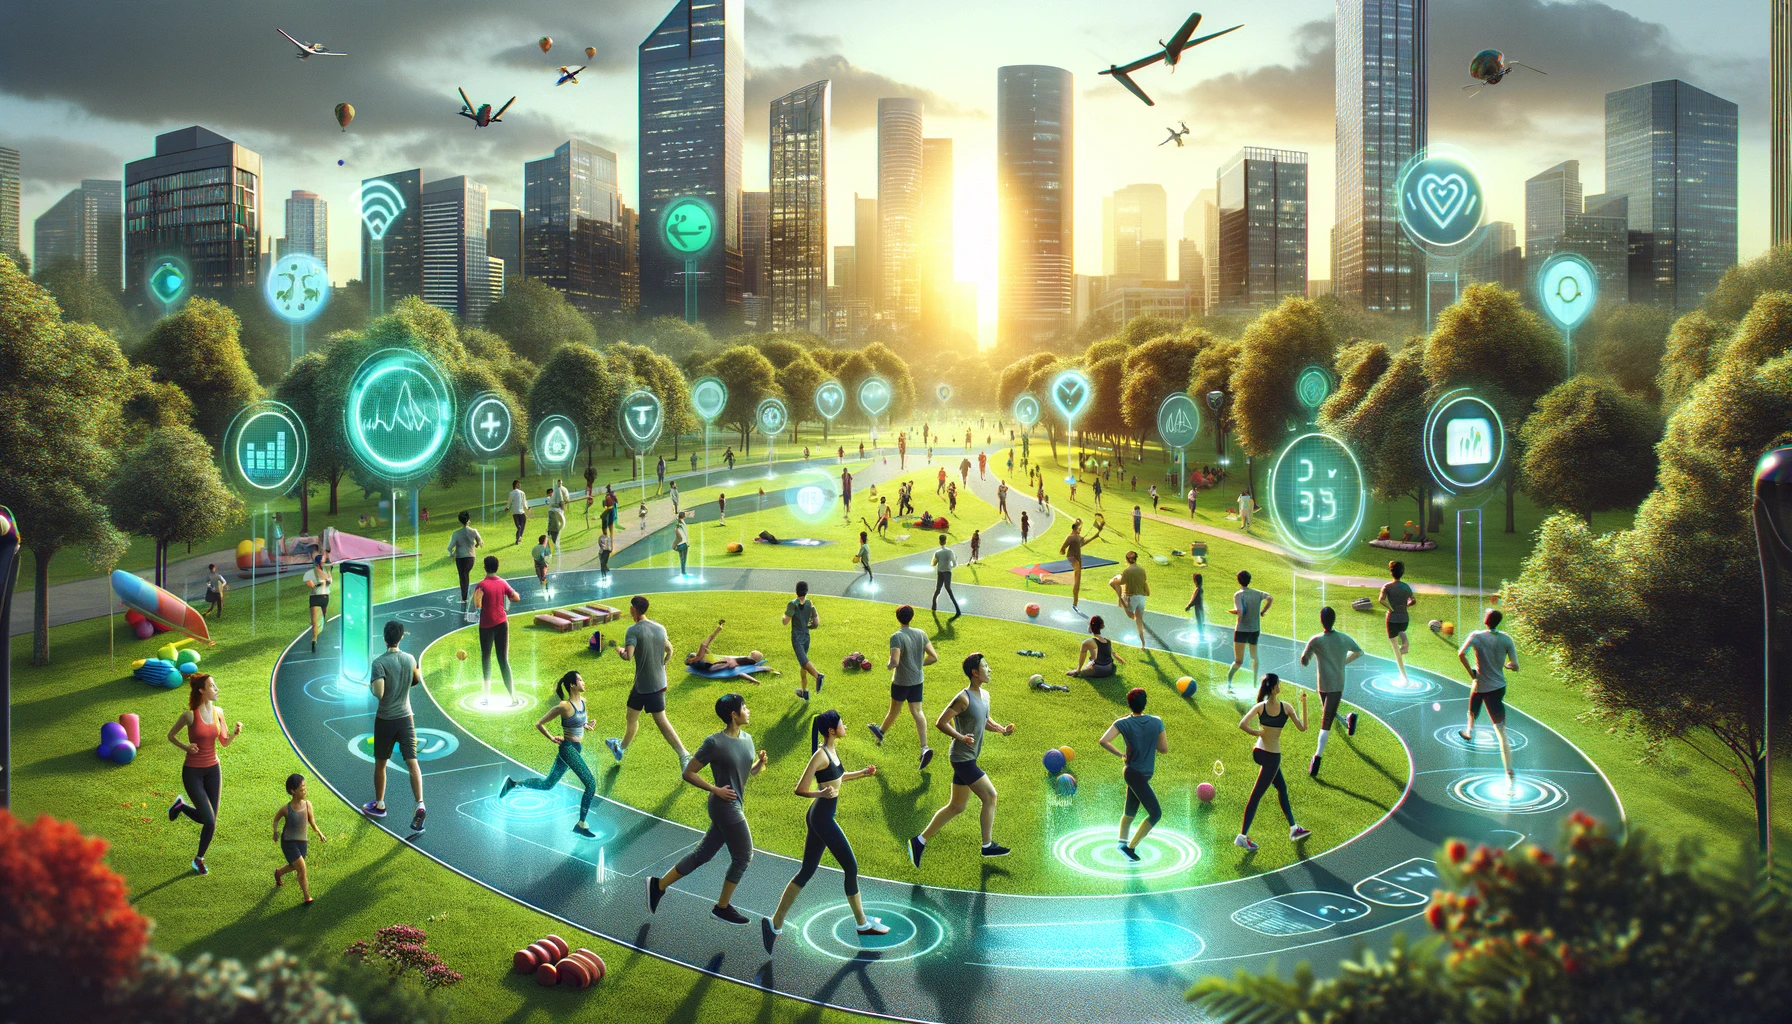 Active individuals in a city park wearing diverse smart clothing and accessories, like glowing shirts, socks, and wristbands, syncing health data with their devices amidst a vibrant, urban setting.